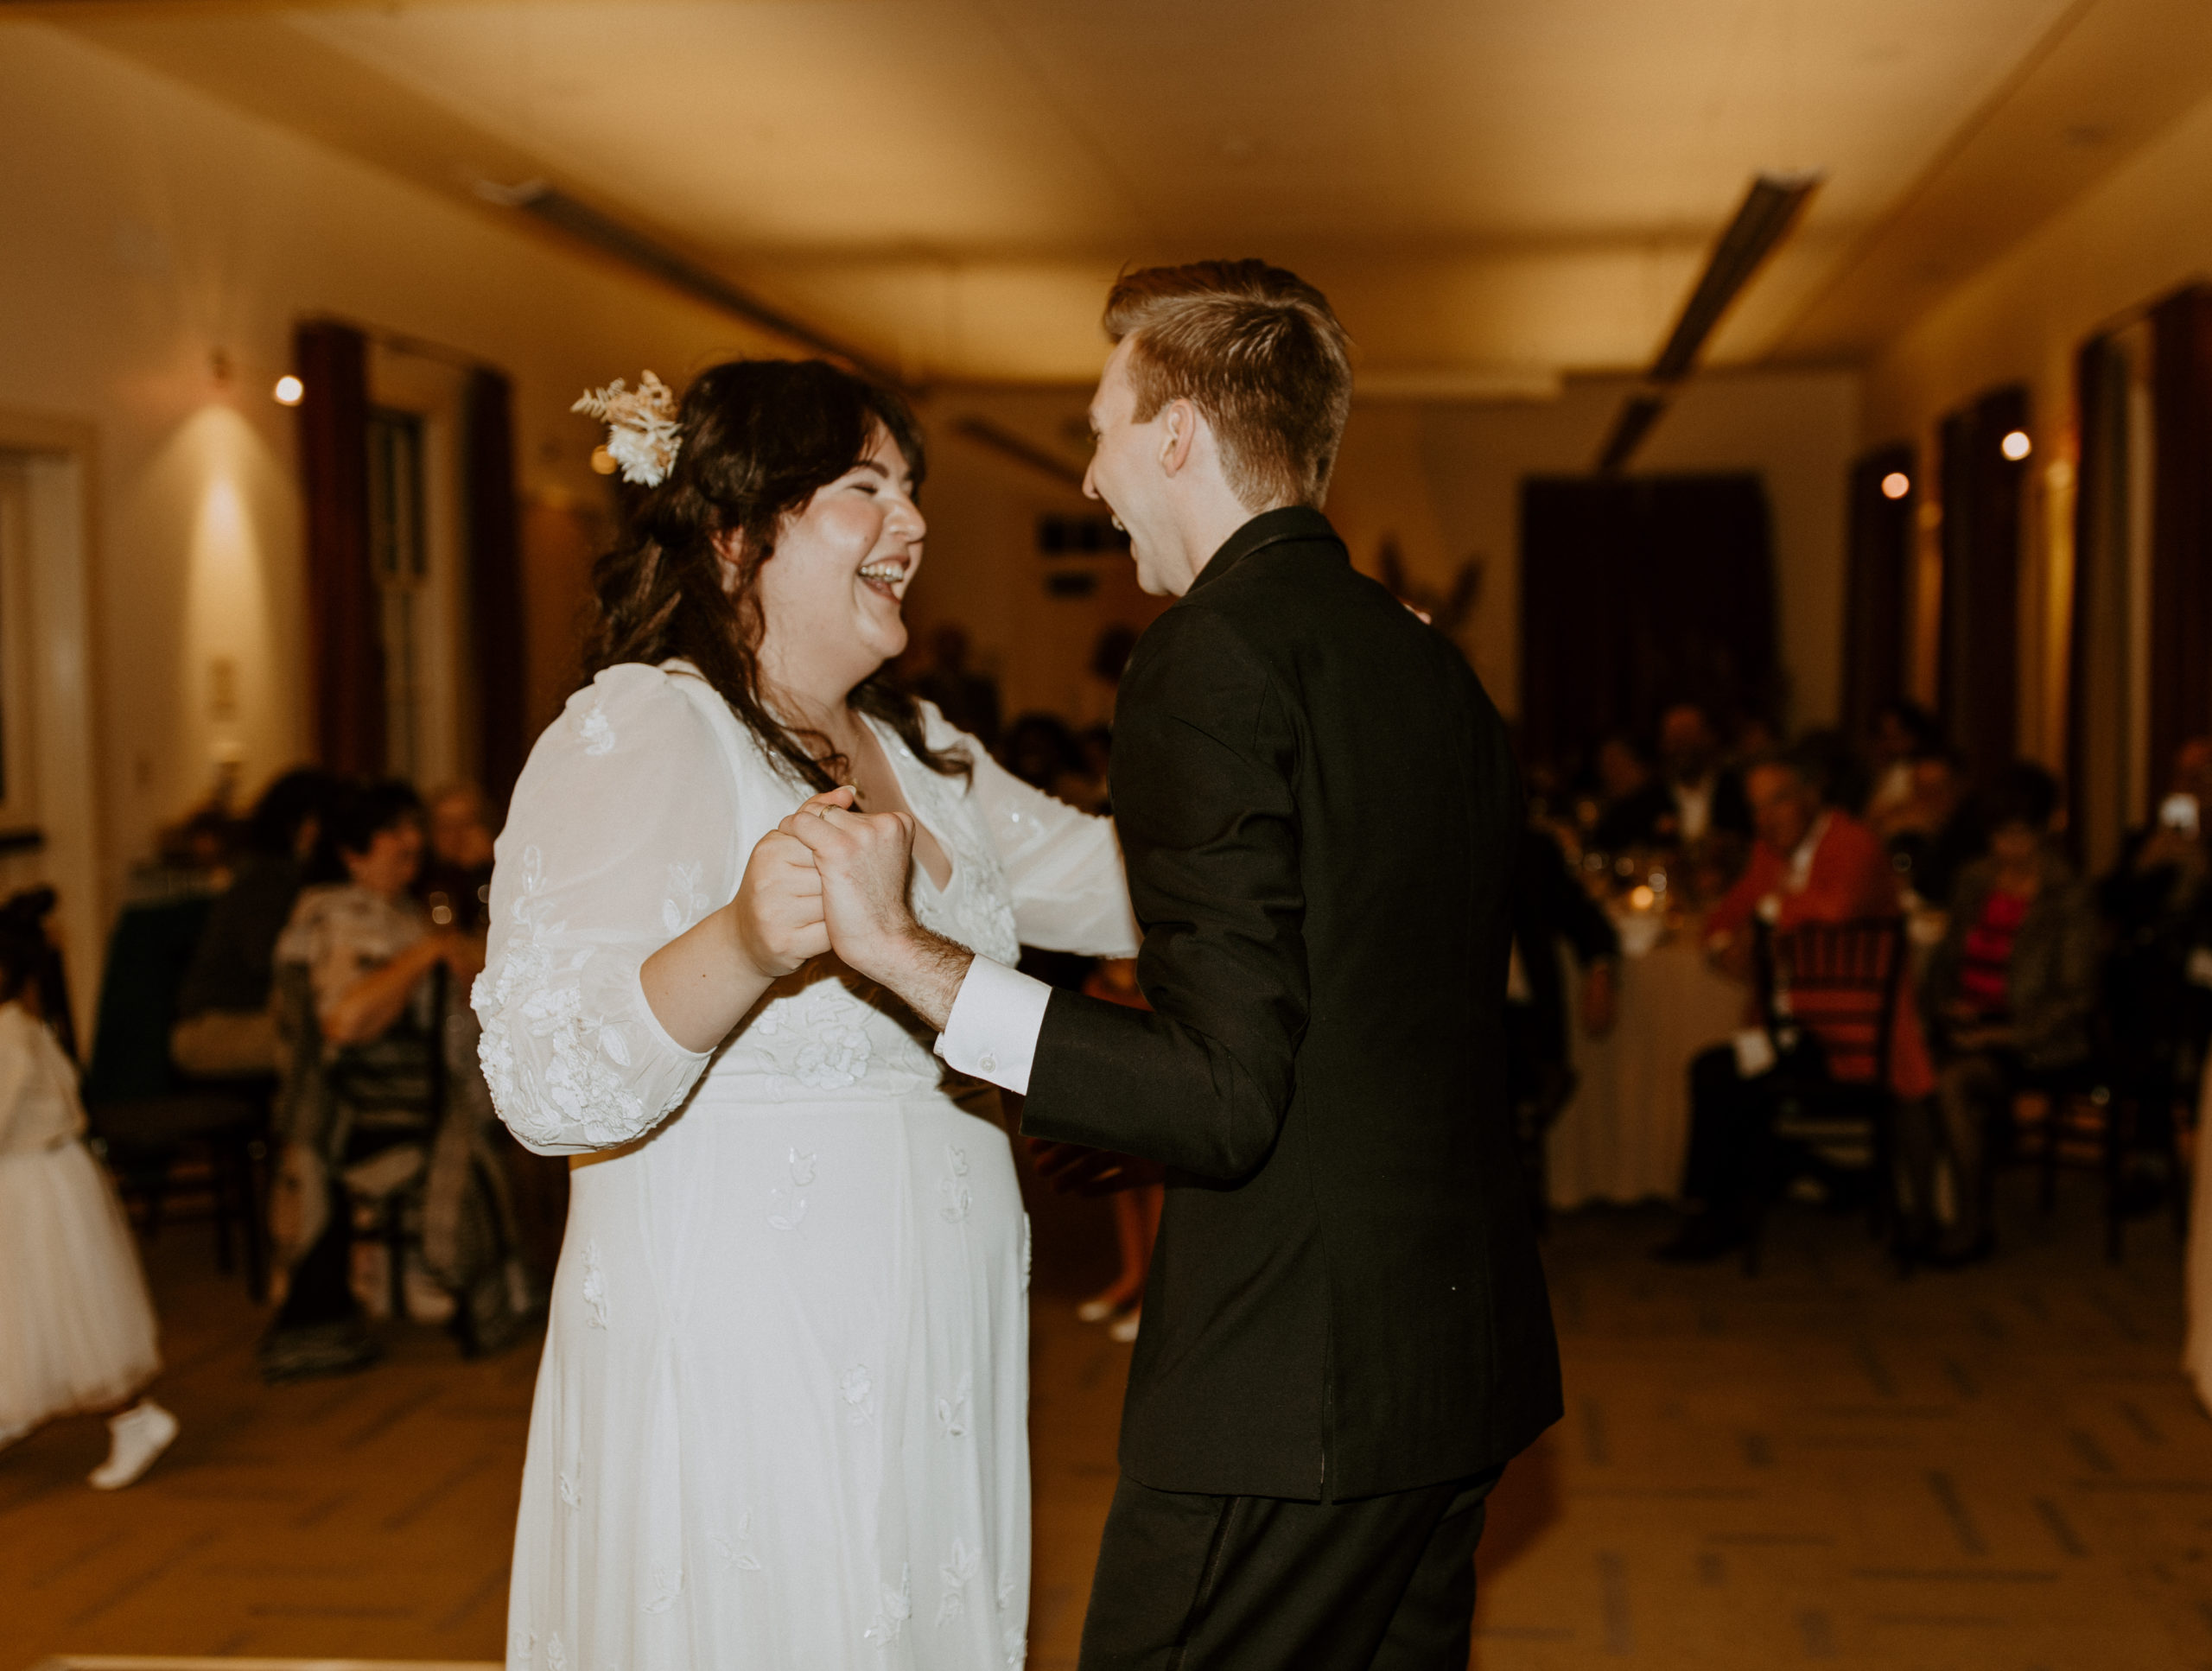 the bride and groom dancing together